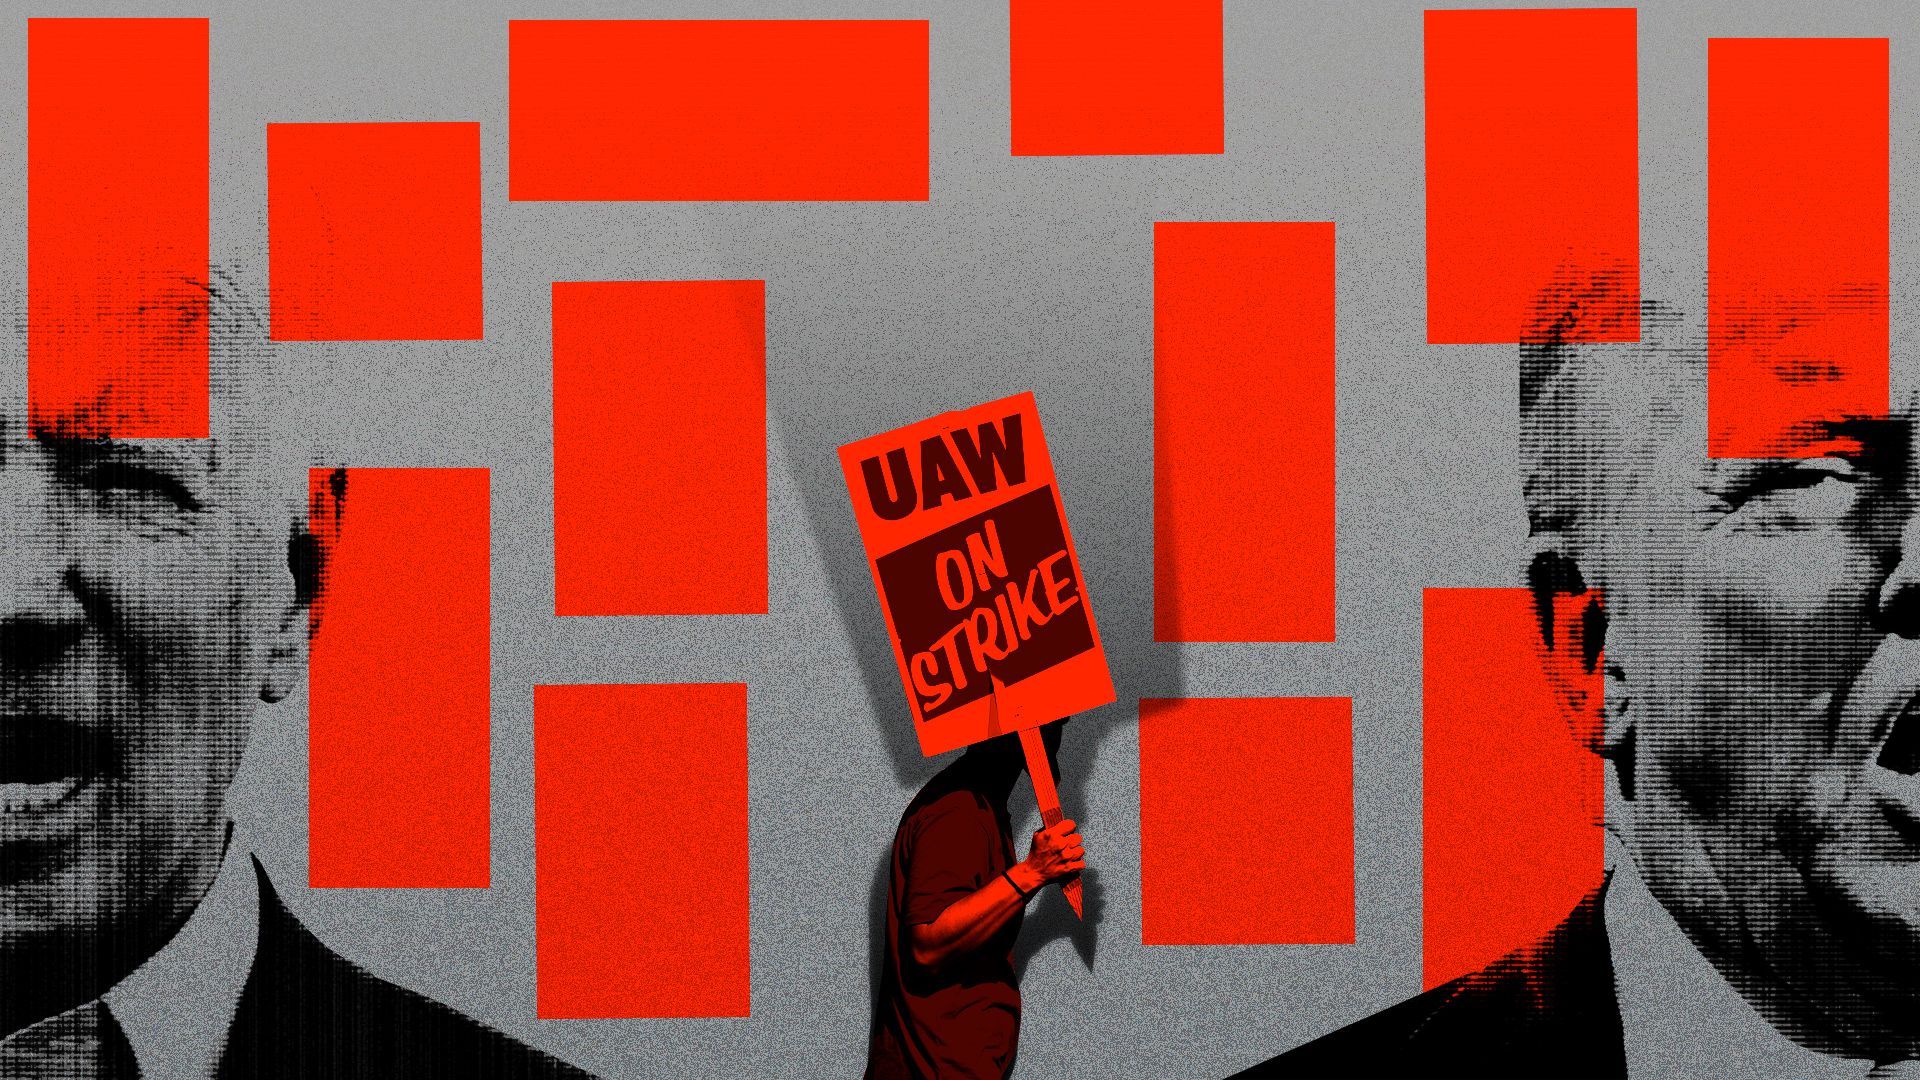 Photo illustration of Joe Biden and Donald Trump with their faces cut out in an abstract way against a background with a lone picketer in the foreground, surrounded by red rectangles.  